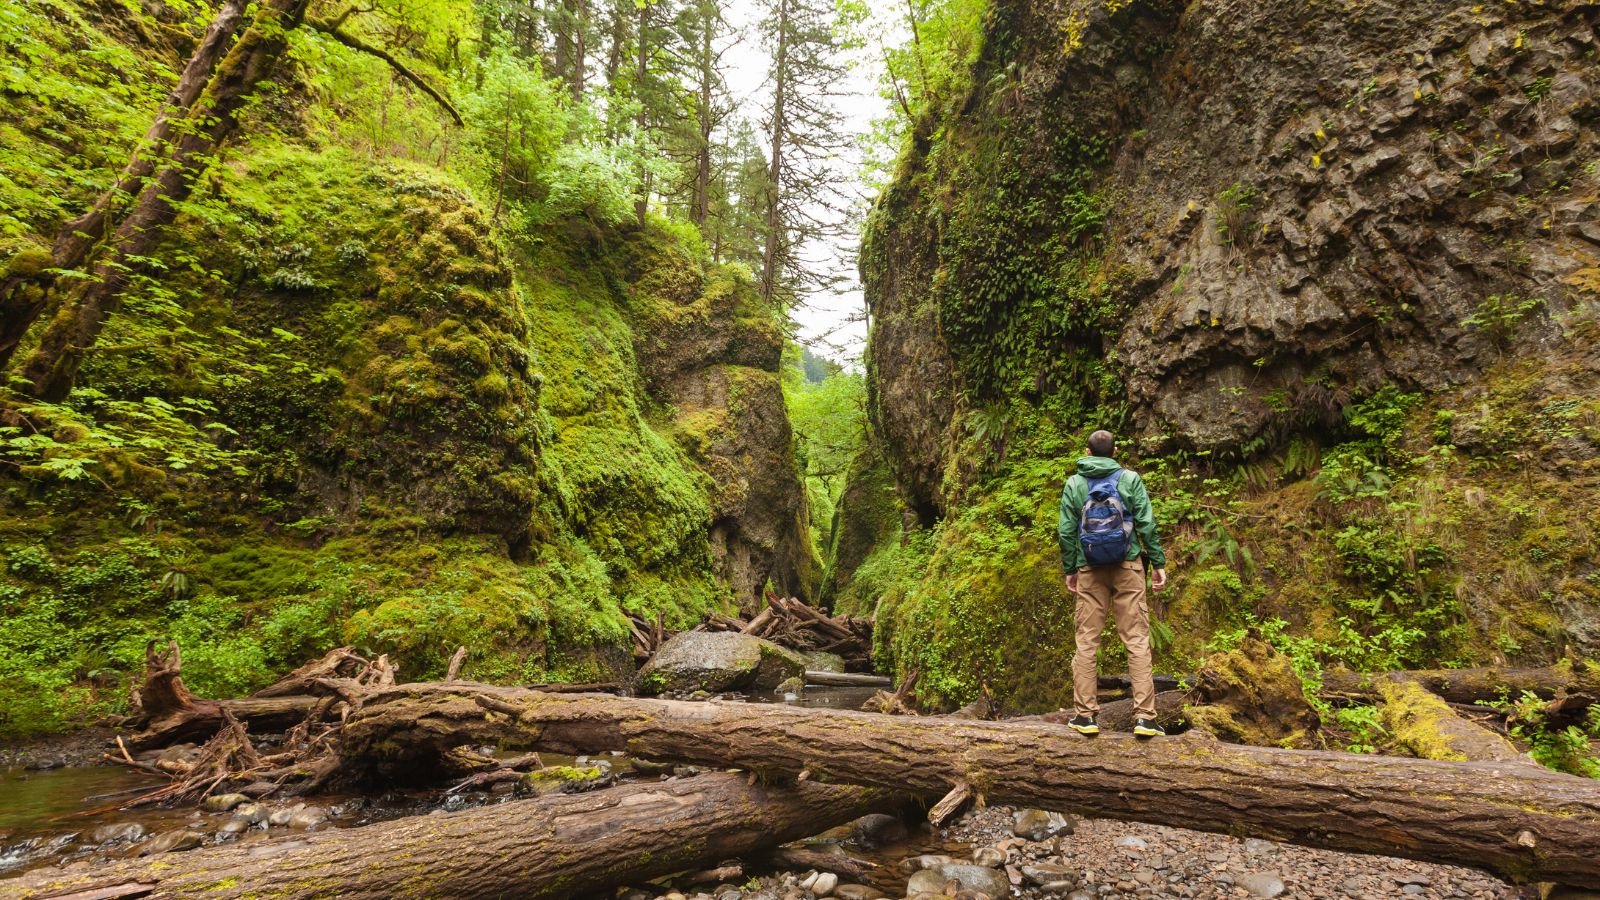 <p>The bright green moss and ferns cover the walls of Oneonta Gorge. It’s a popular tourist destination in the Pacific Northwest. It is located in the Columbia River Gorge, so you may see cliffs and waterfalls while there.</p>